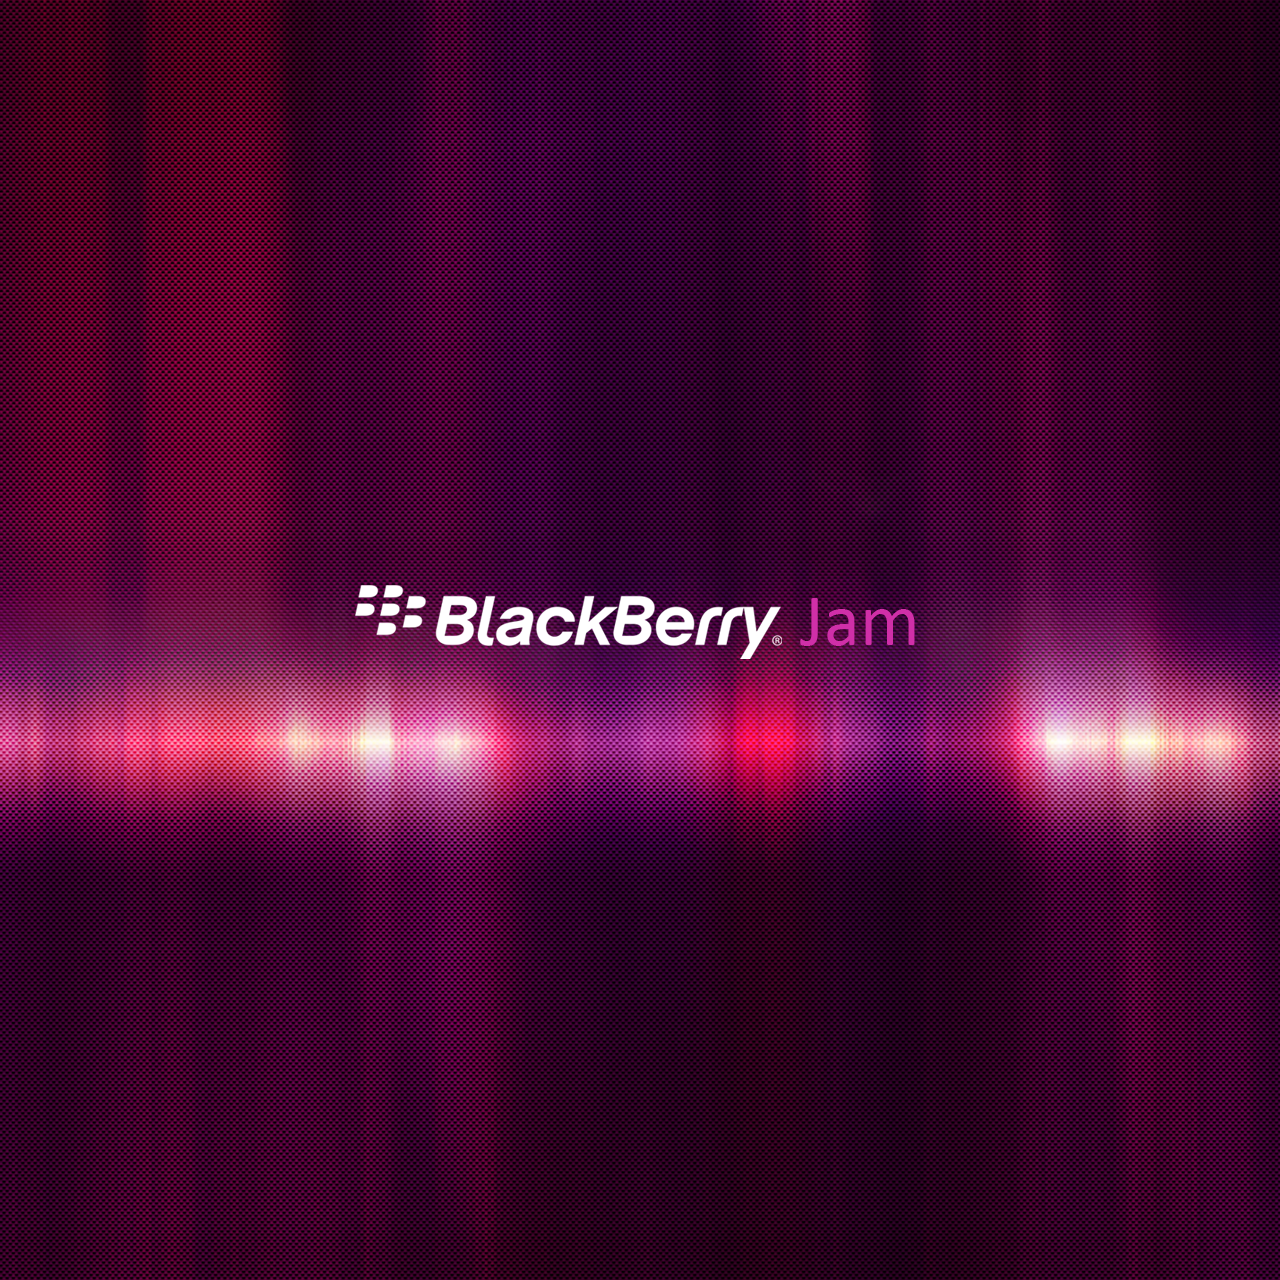 Related Pictures Blackberry Mobile Wallpaper